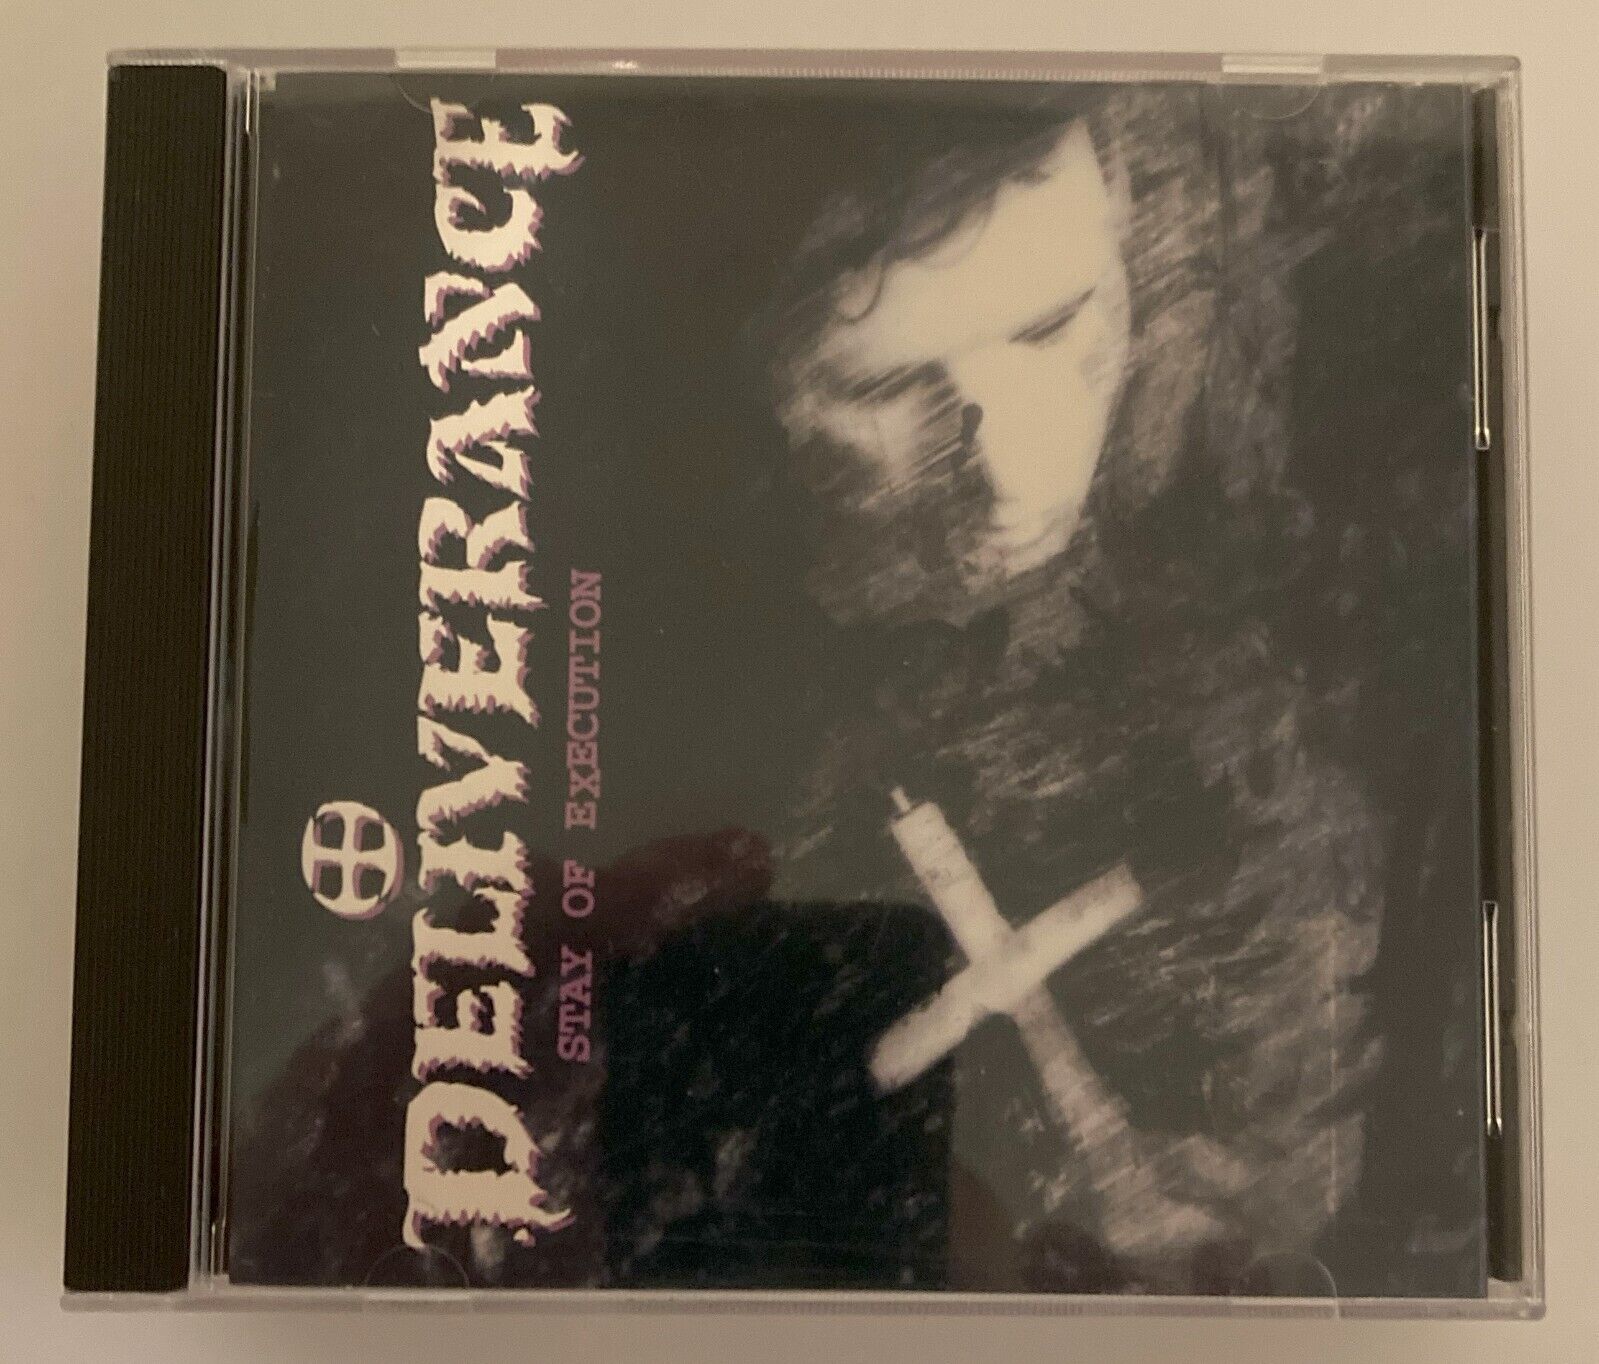 Deliverance - stay of execution CD ORIGINAL INTENSE 1992-VERY NICE